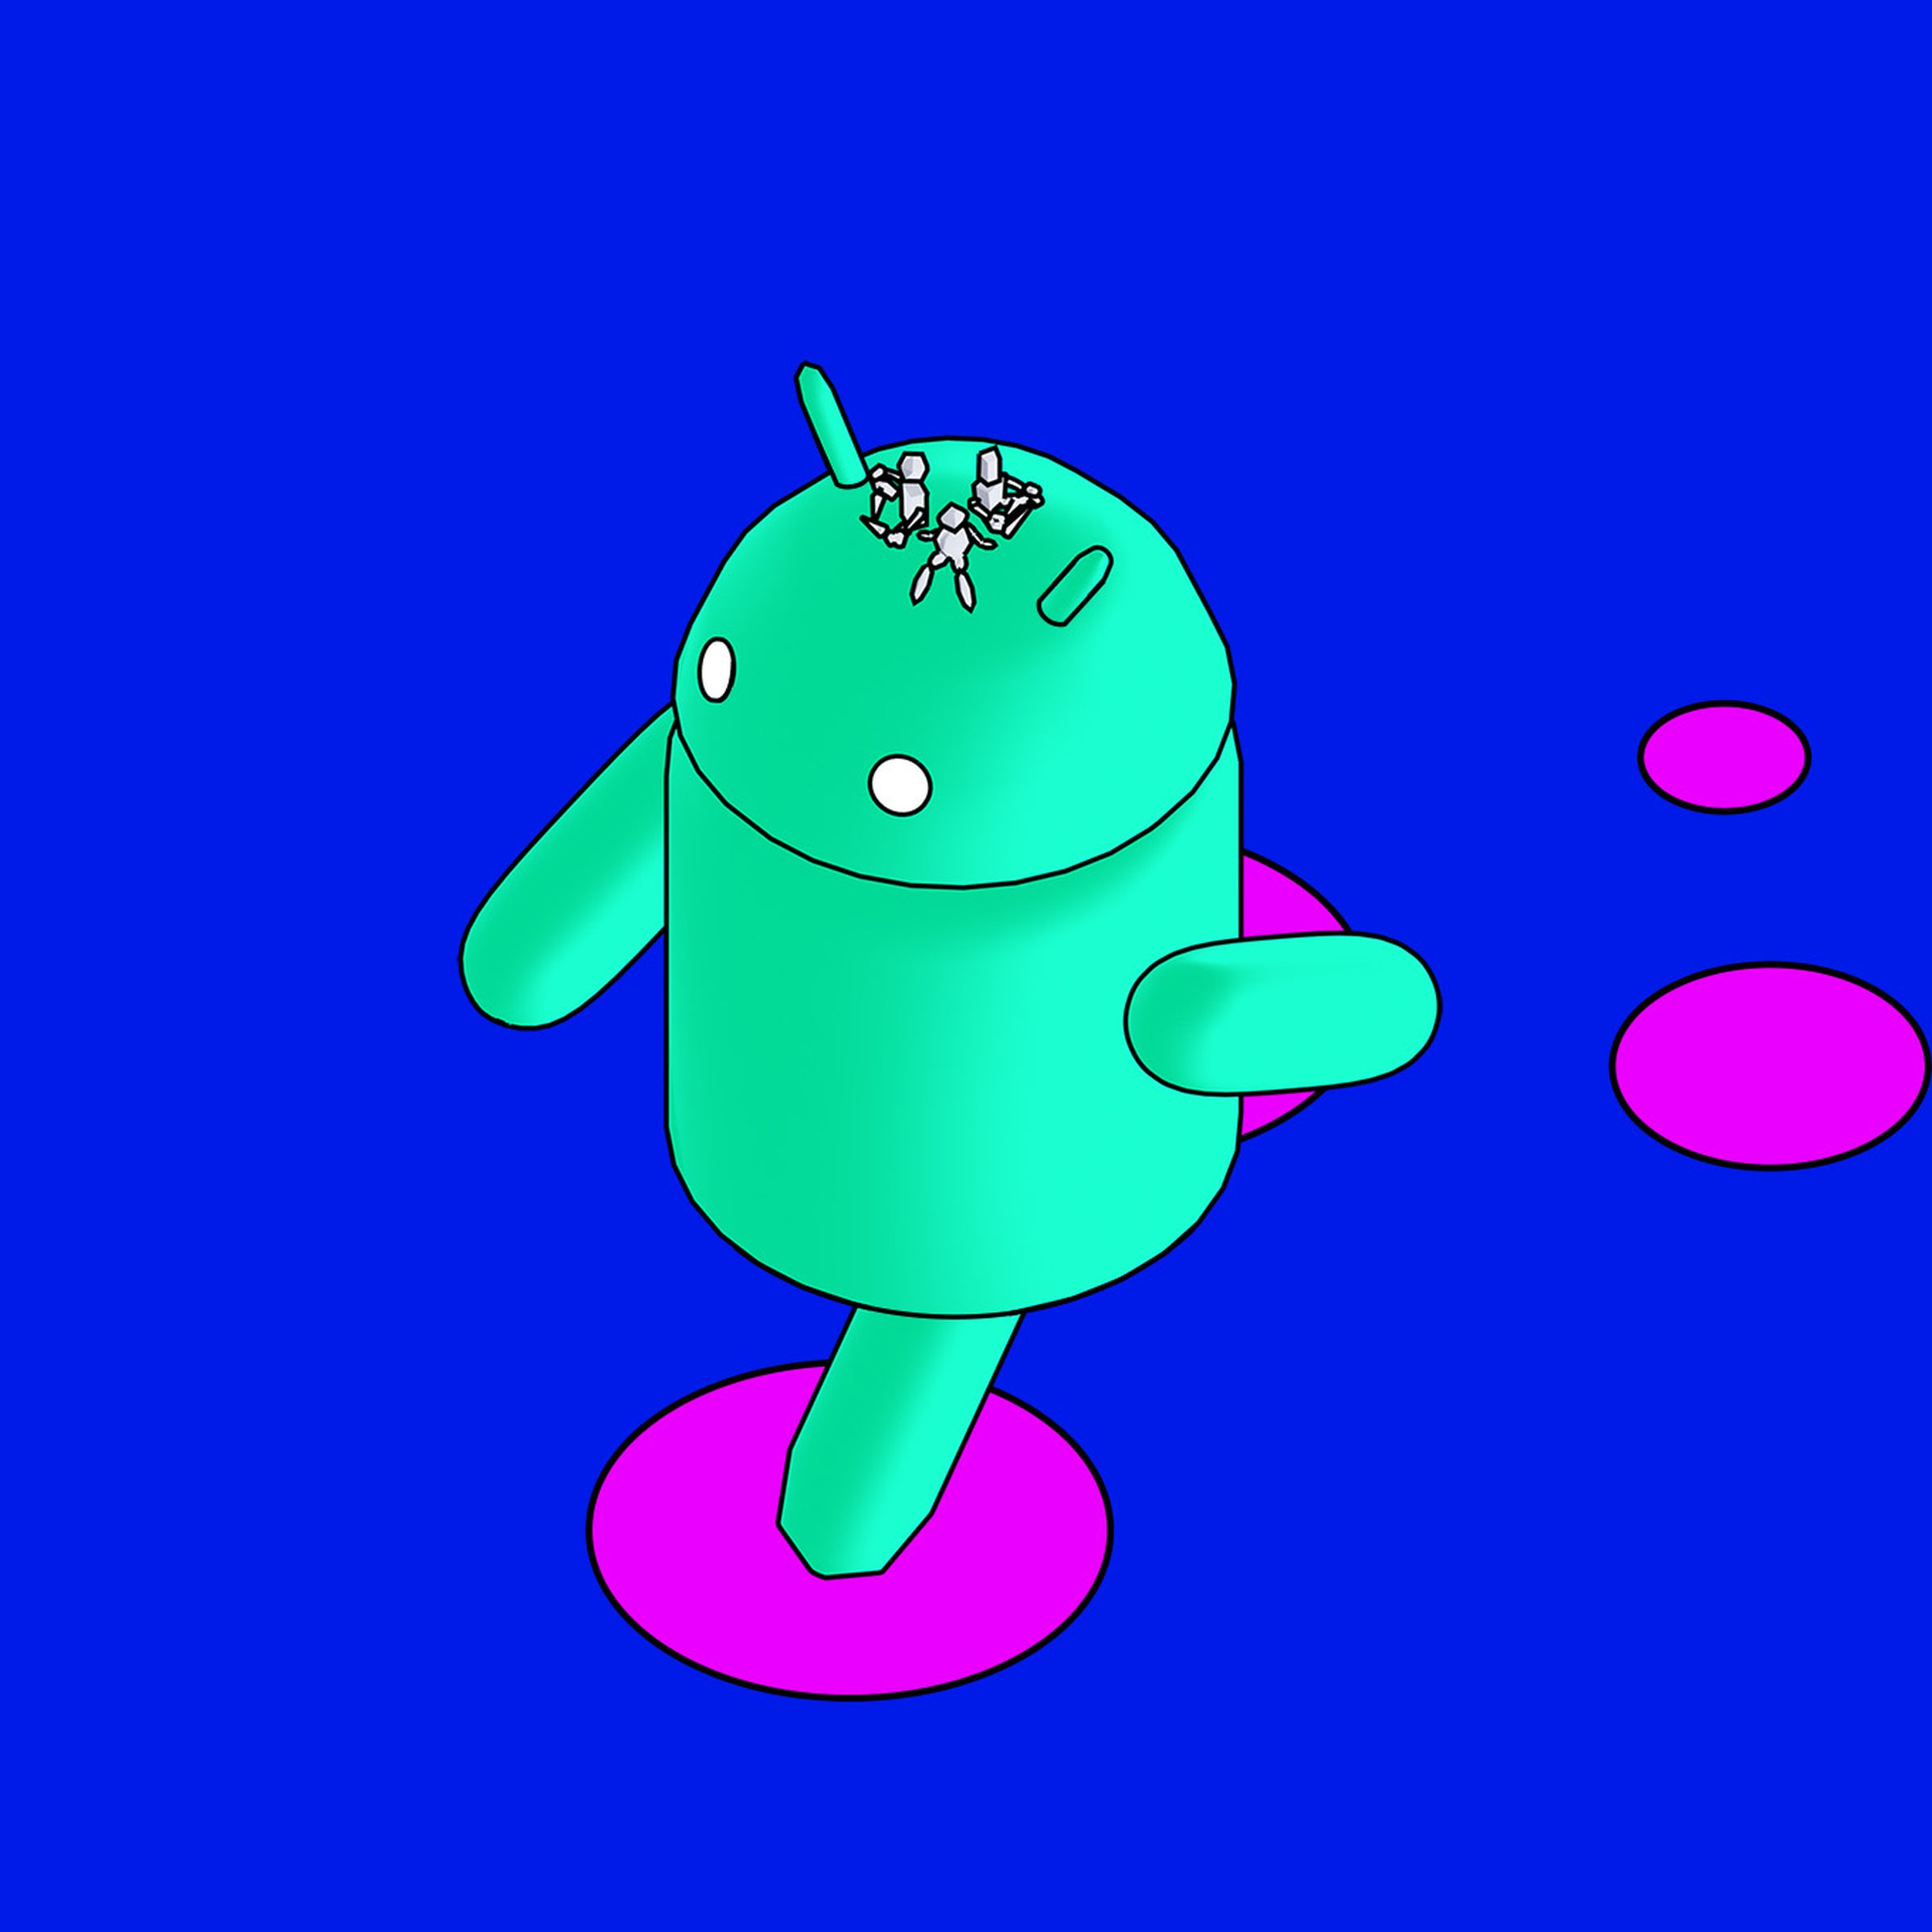 Three characters sit on top of a large android, inspired by the Android logo, across an open area.